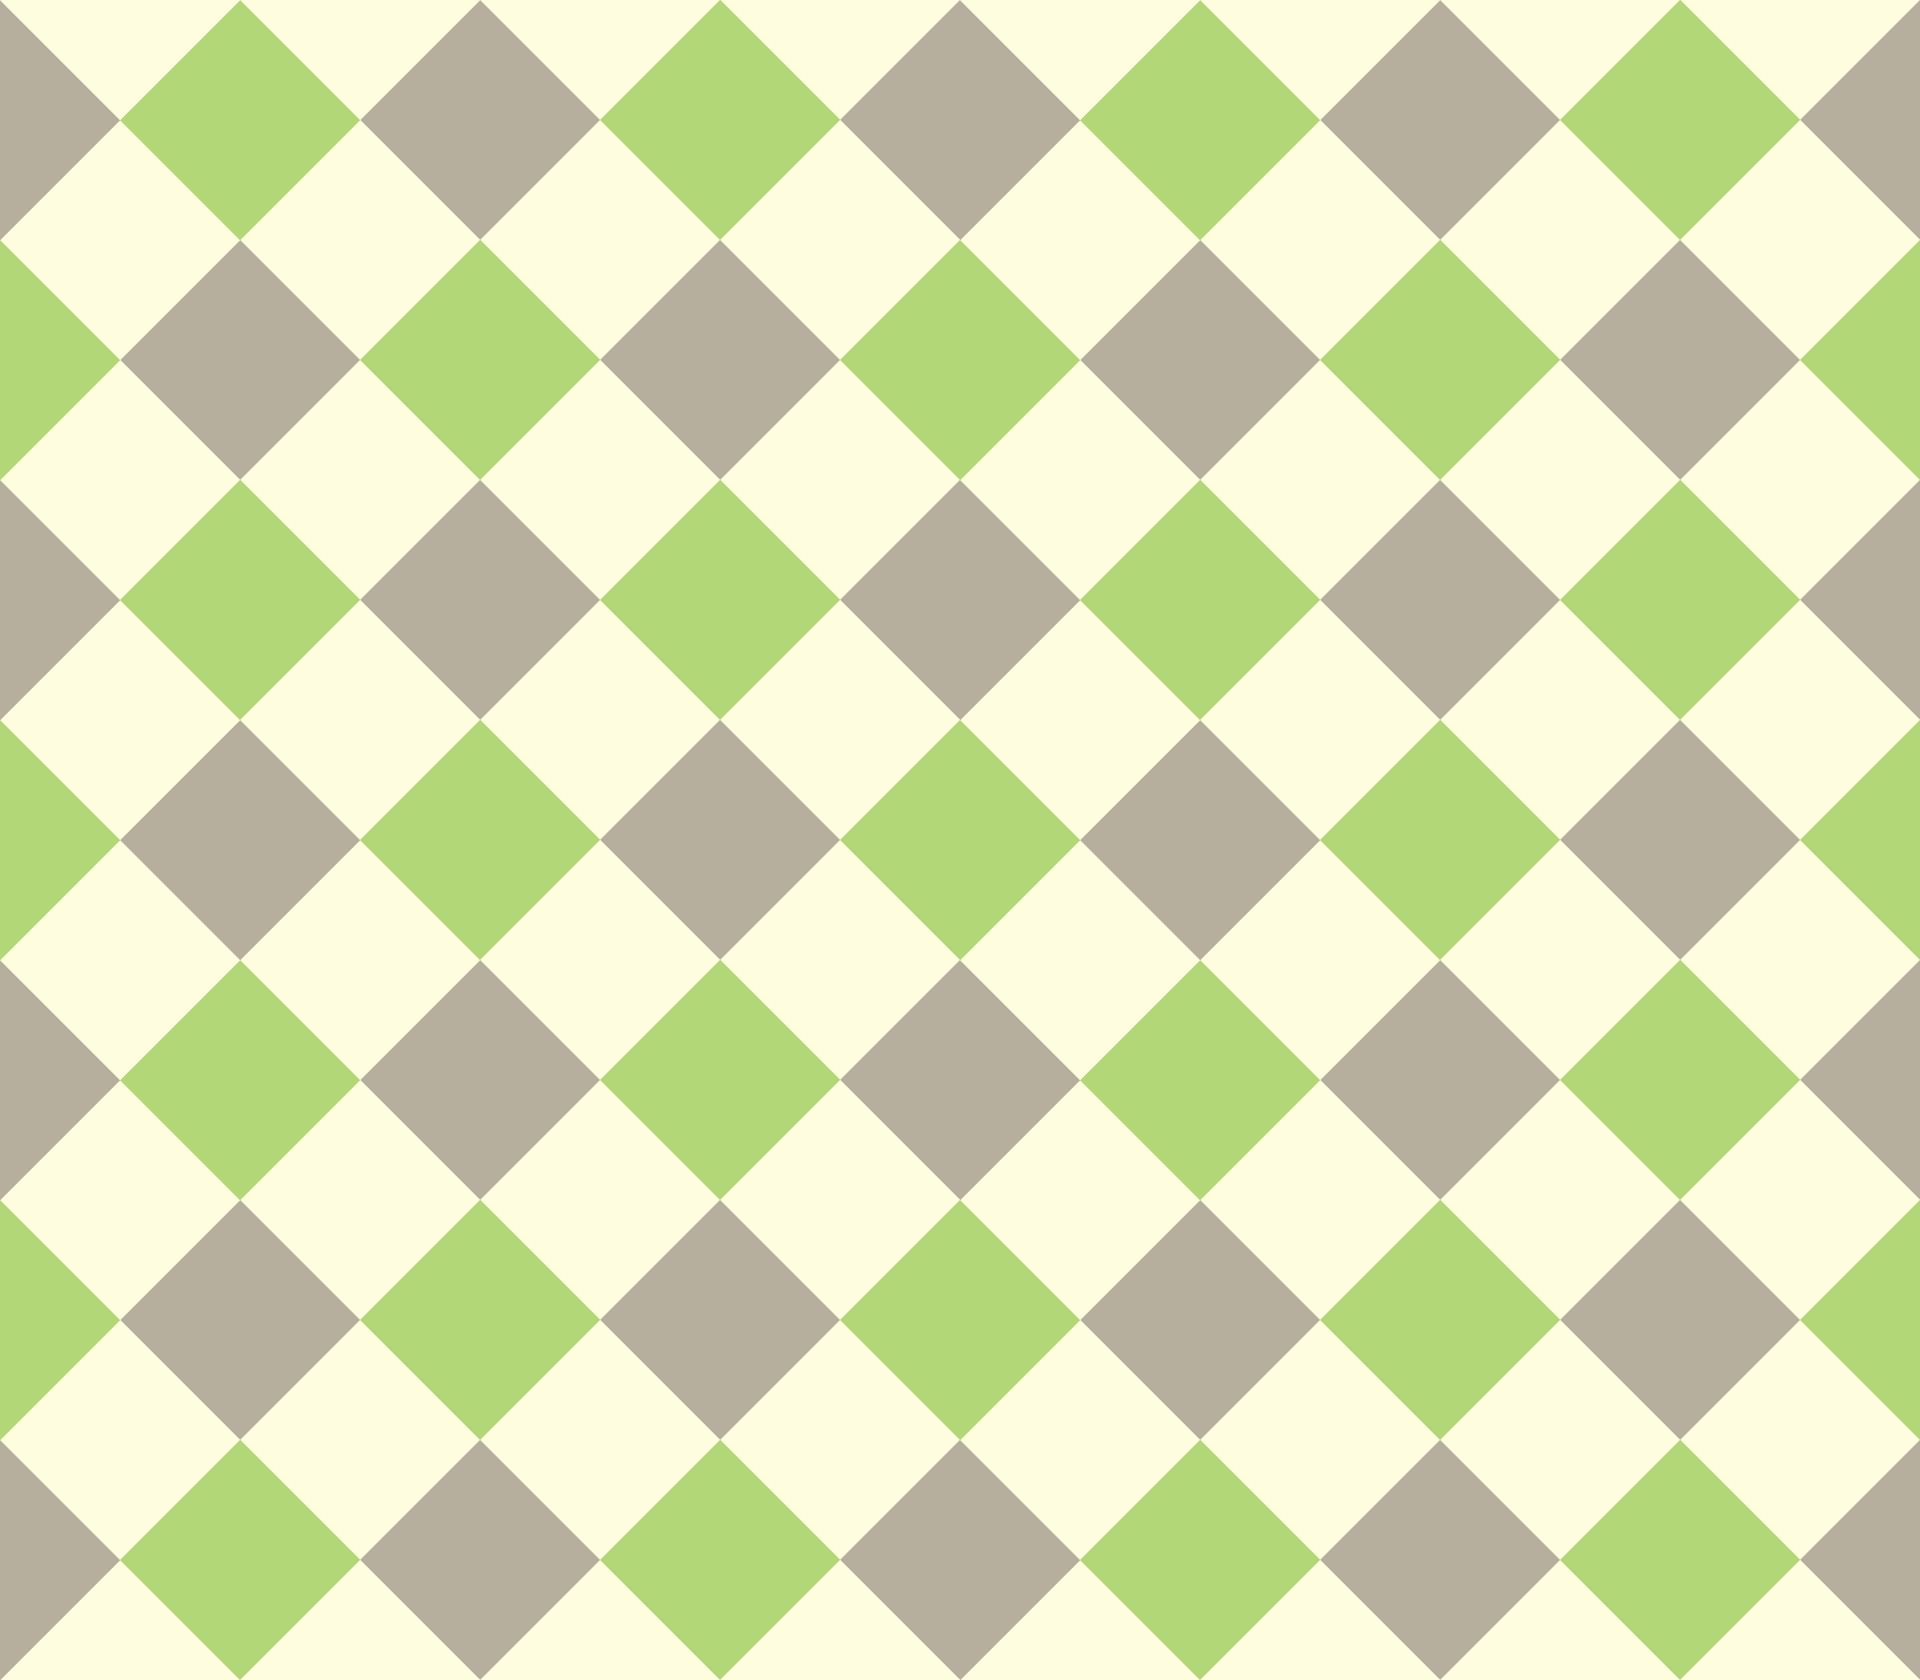 lime and beige checkerboard pattern - Your premium download is greatly appreciated – enjoy!